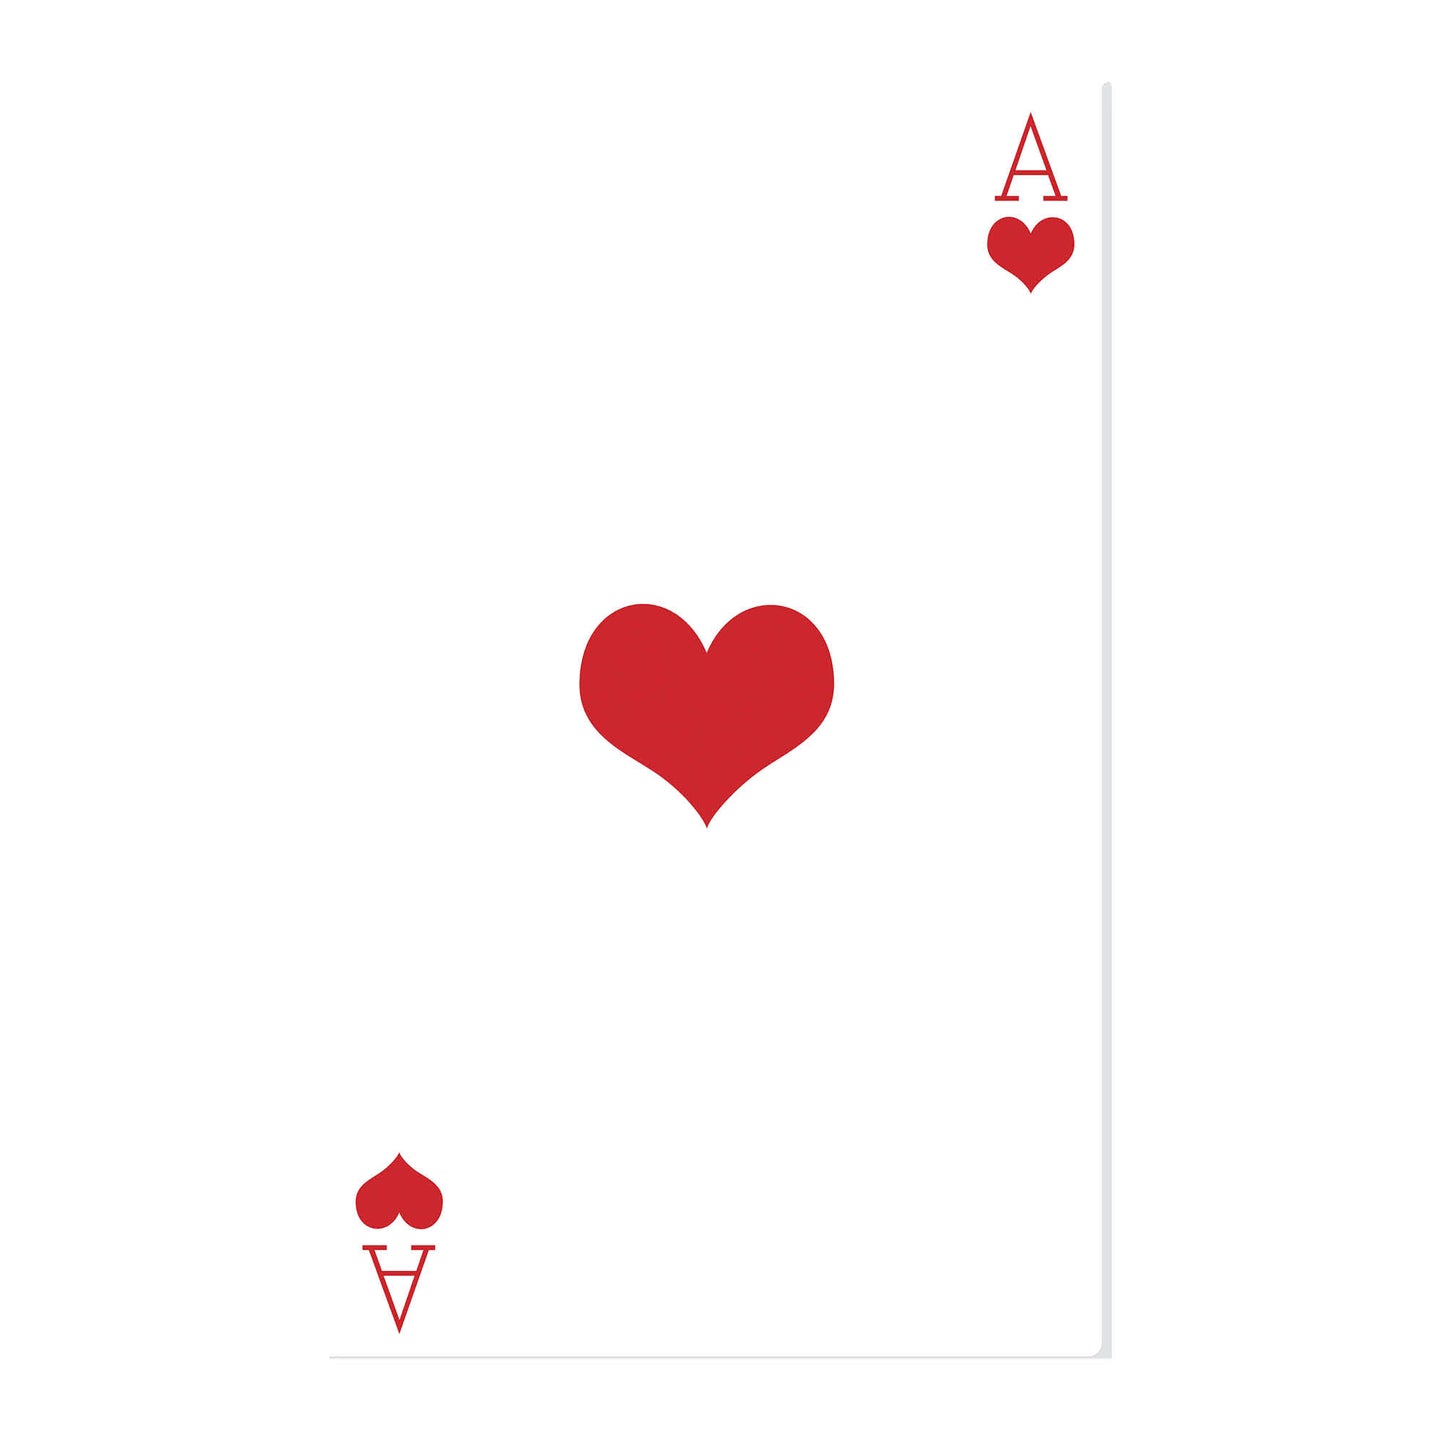 SC023 Ace of Hearts Playing Card Cardboard Cut Out Height 154cm